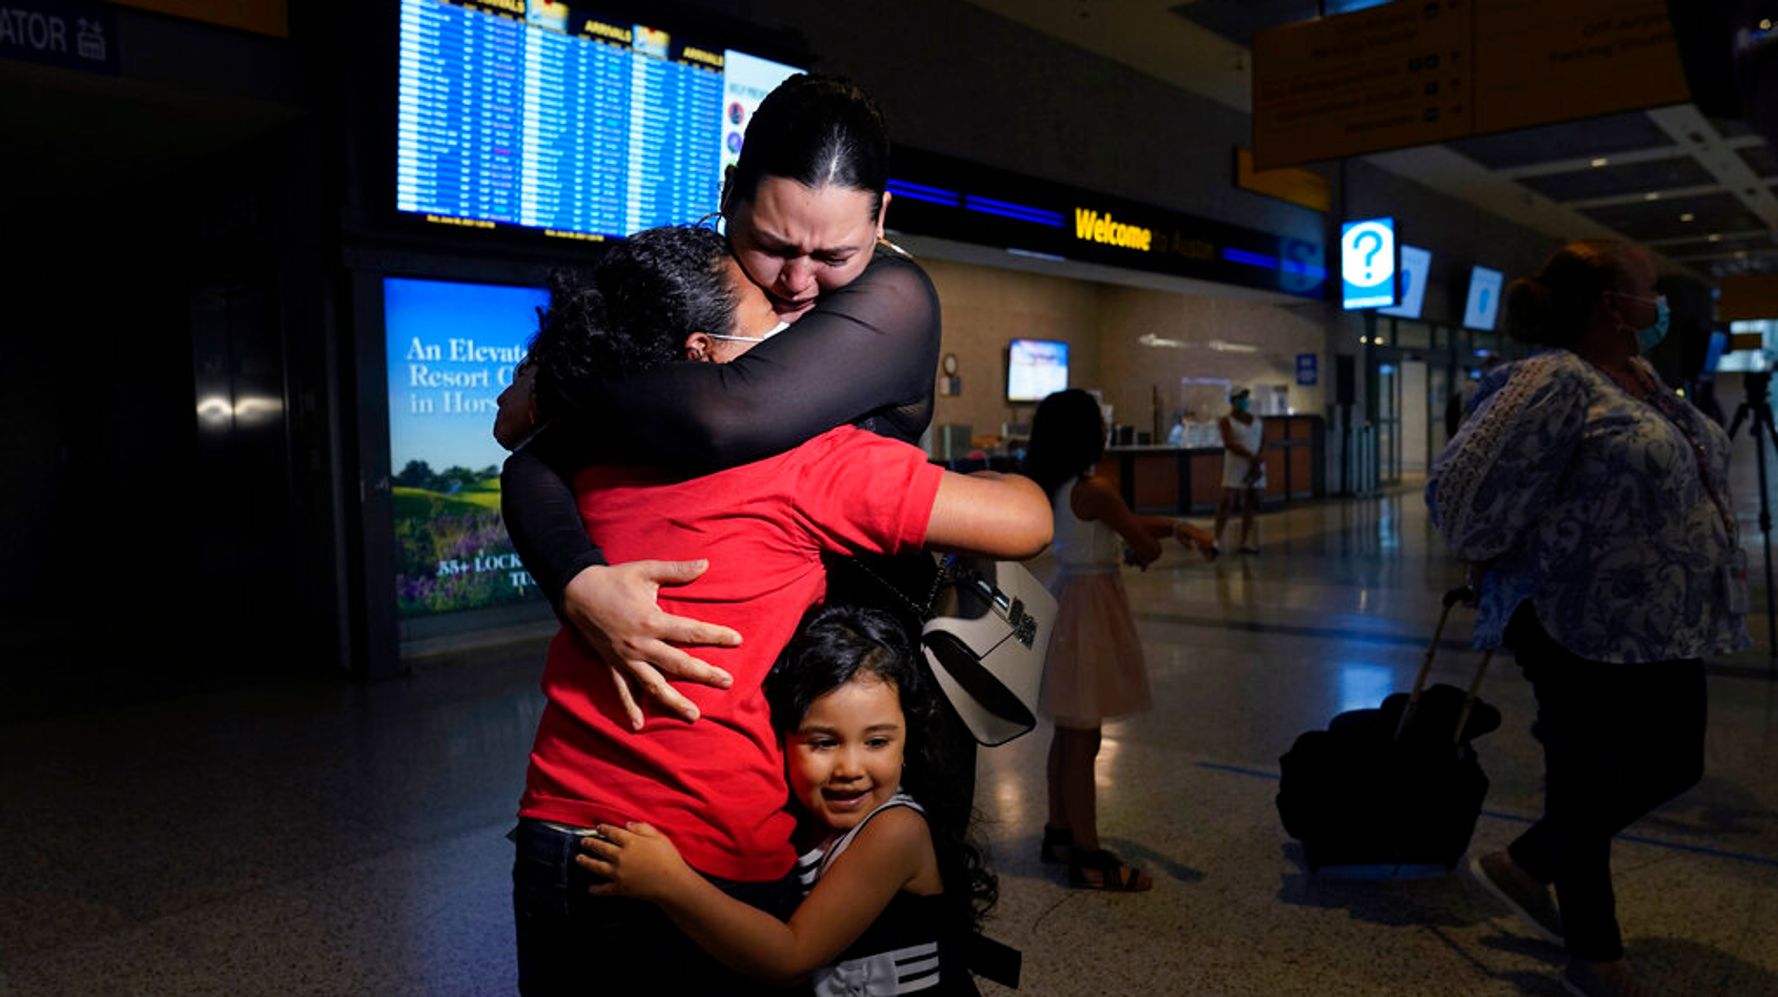 Mom And Daughter Tearfully Reunite At U.S. Border After 6 Years Apart